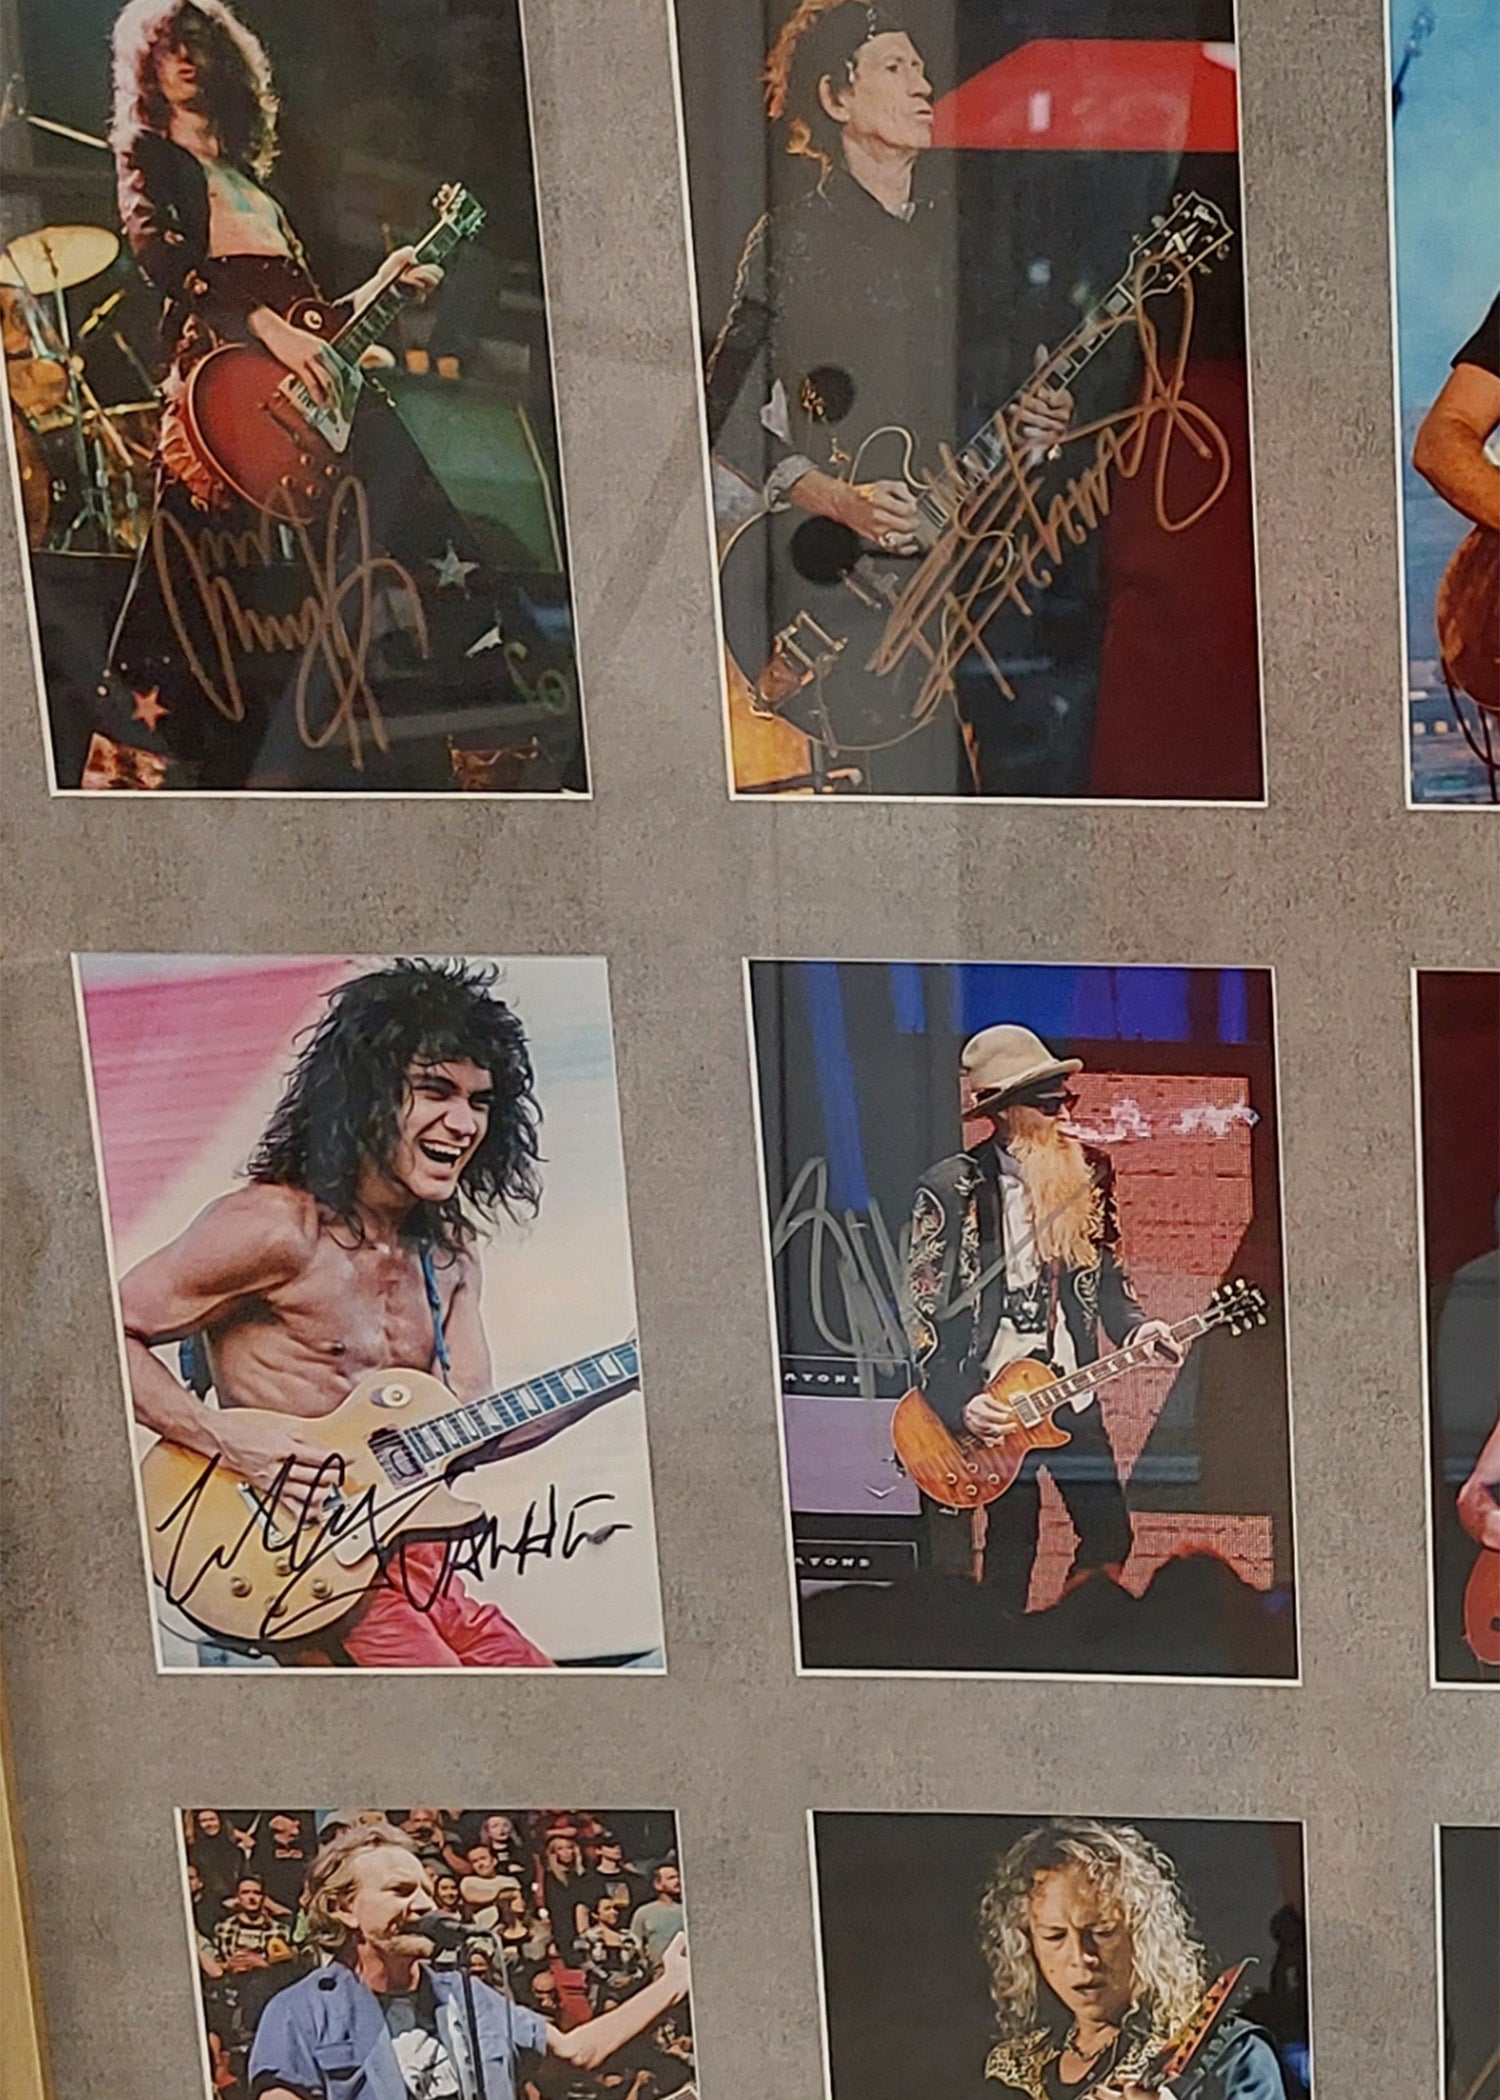 20 Rock n Roll guitar greats Keith Richards, Carlos Santana, Jeff Beck, Jimmy Page 32x45 framed and signed with proof